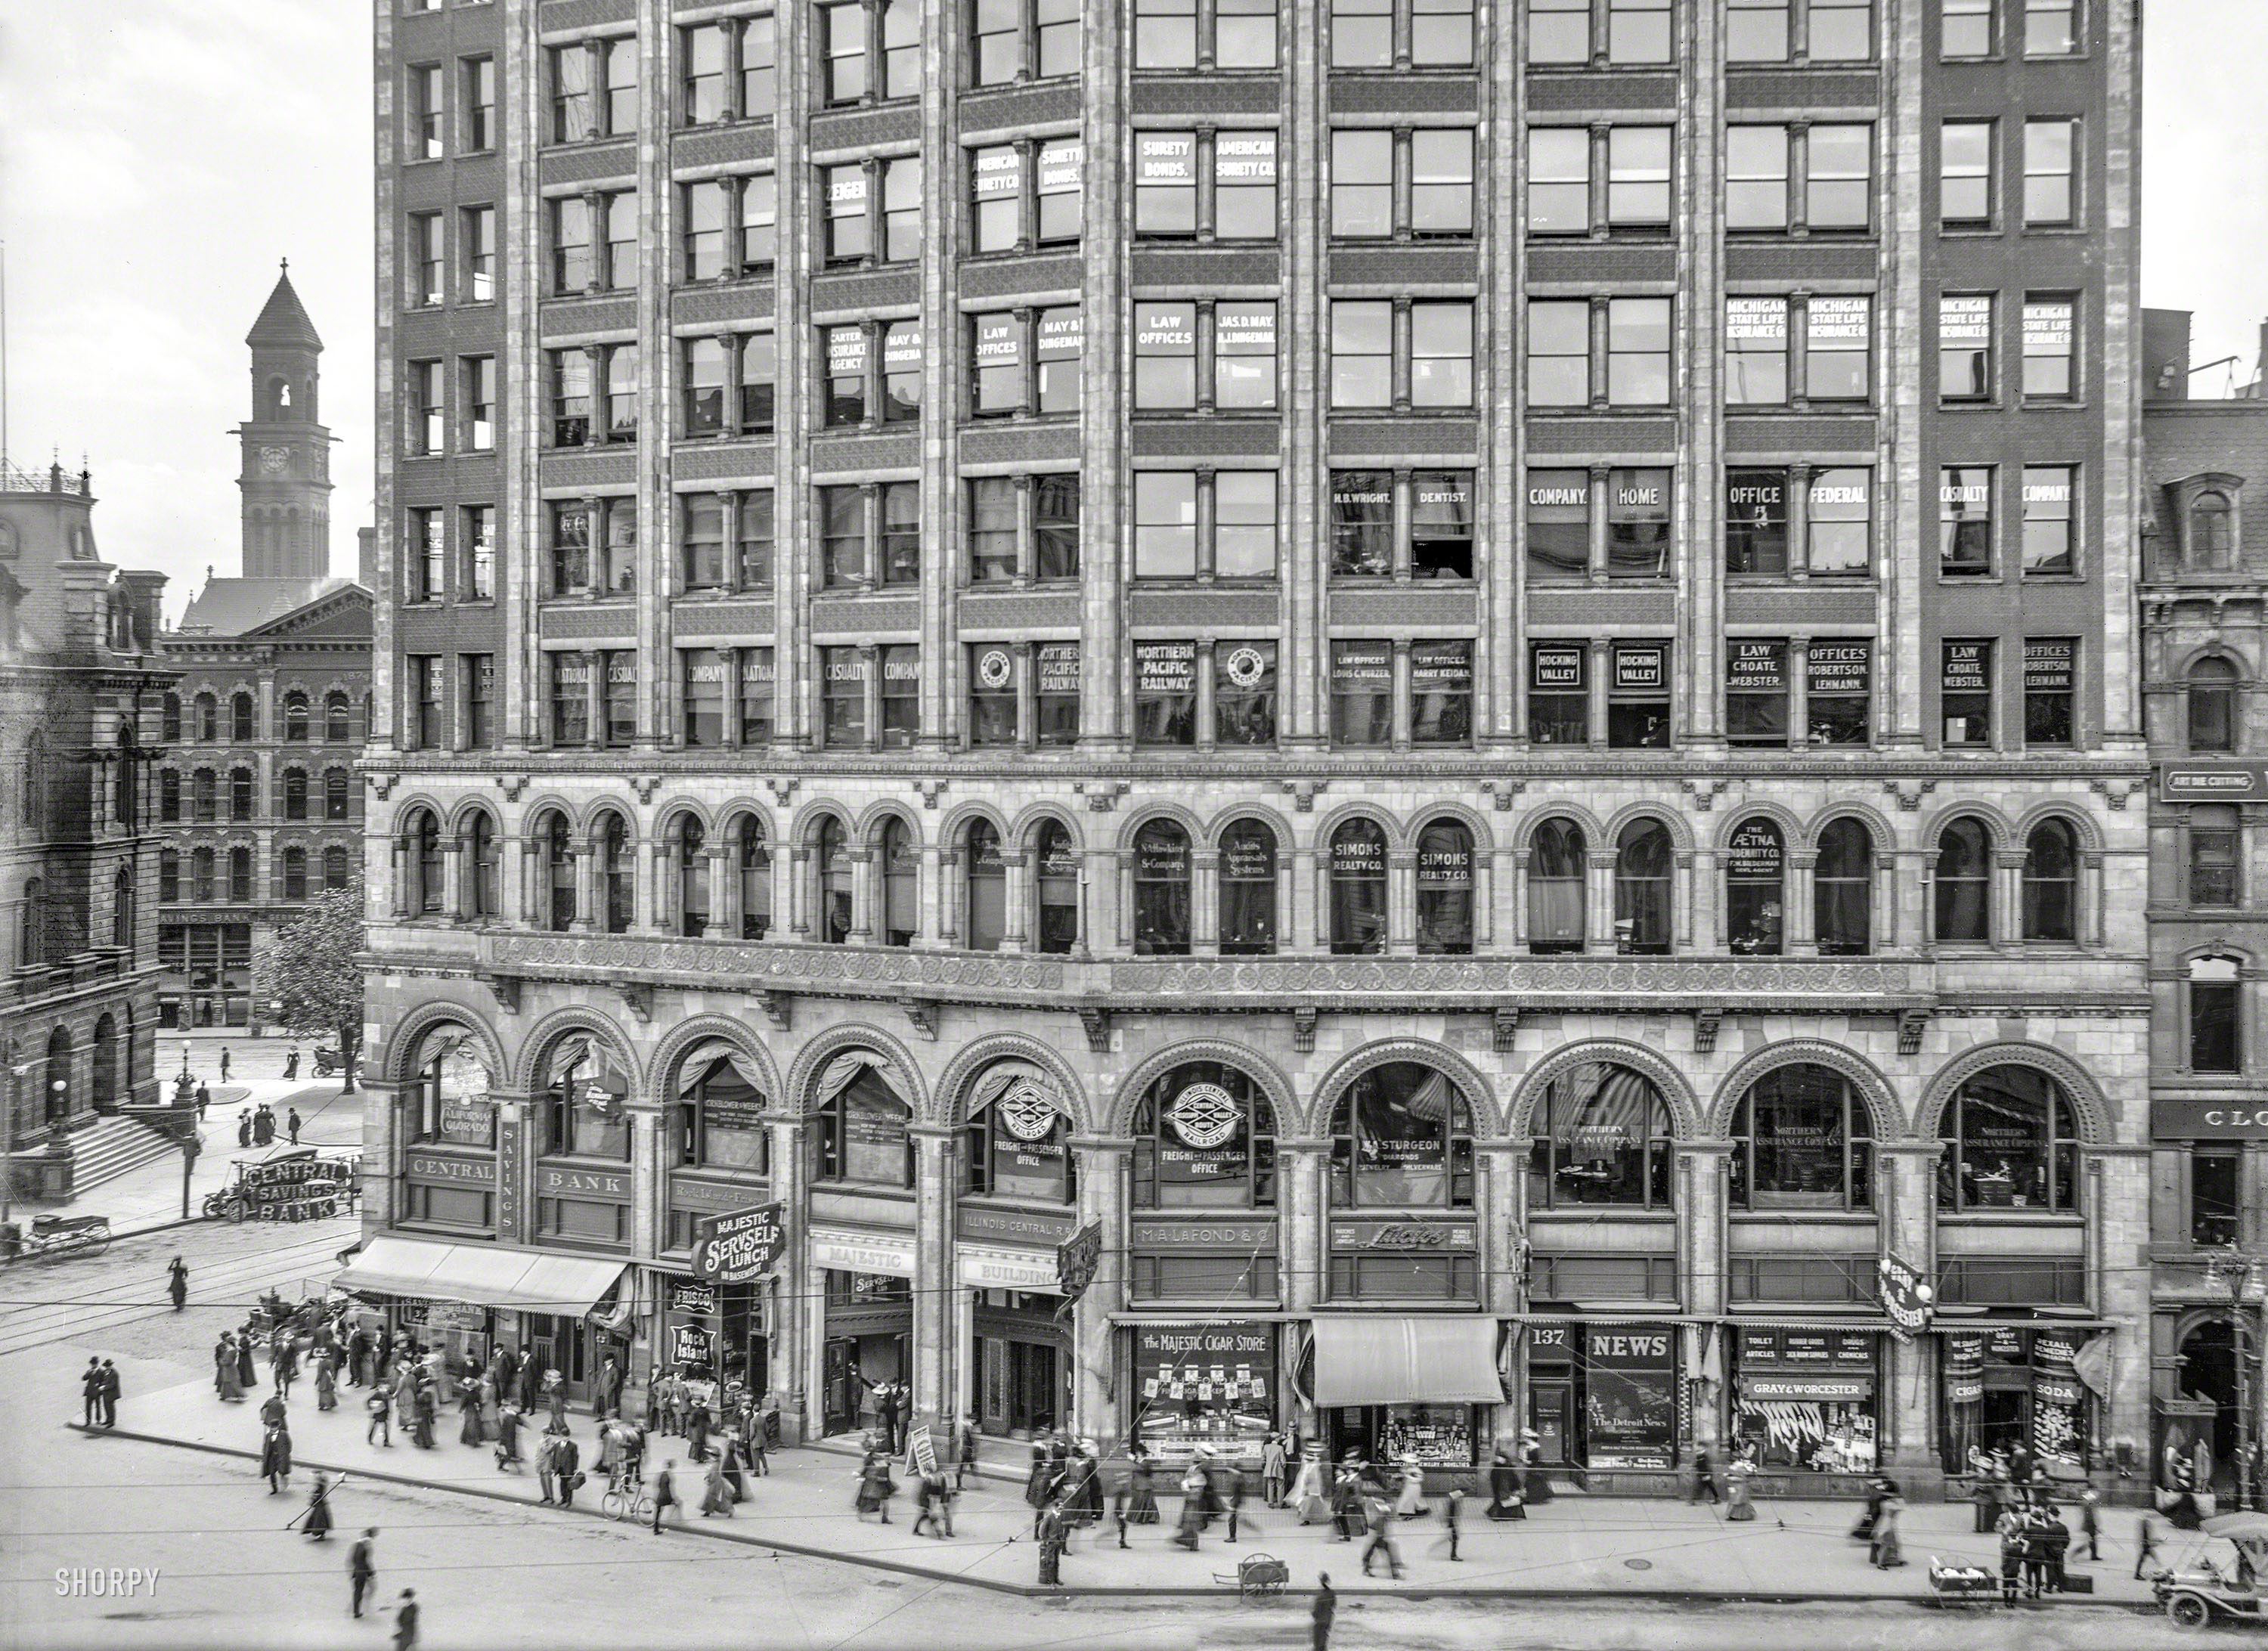 1909. "Majestic Building from Detroit Opera House." With "ServSelf Lunch in Basement." 8x10 inch glass negative, Detroit Publishing Co. View full size.